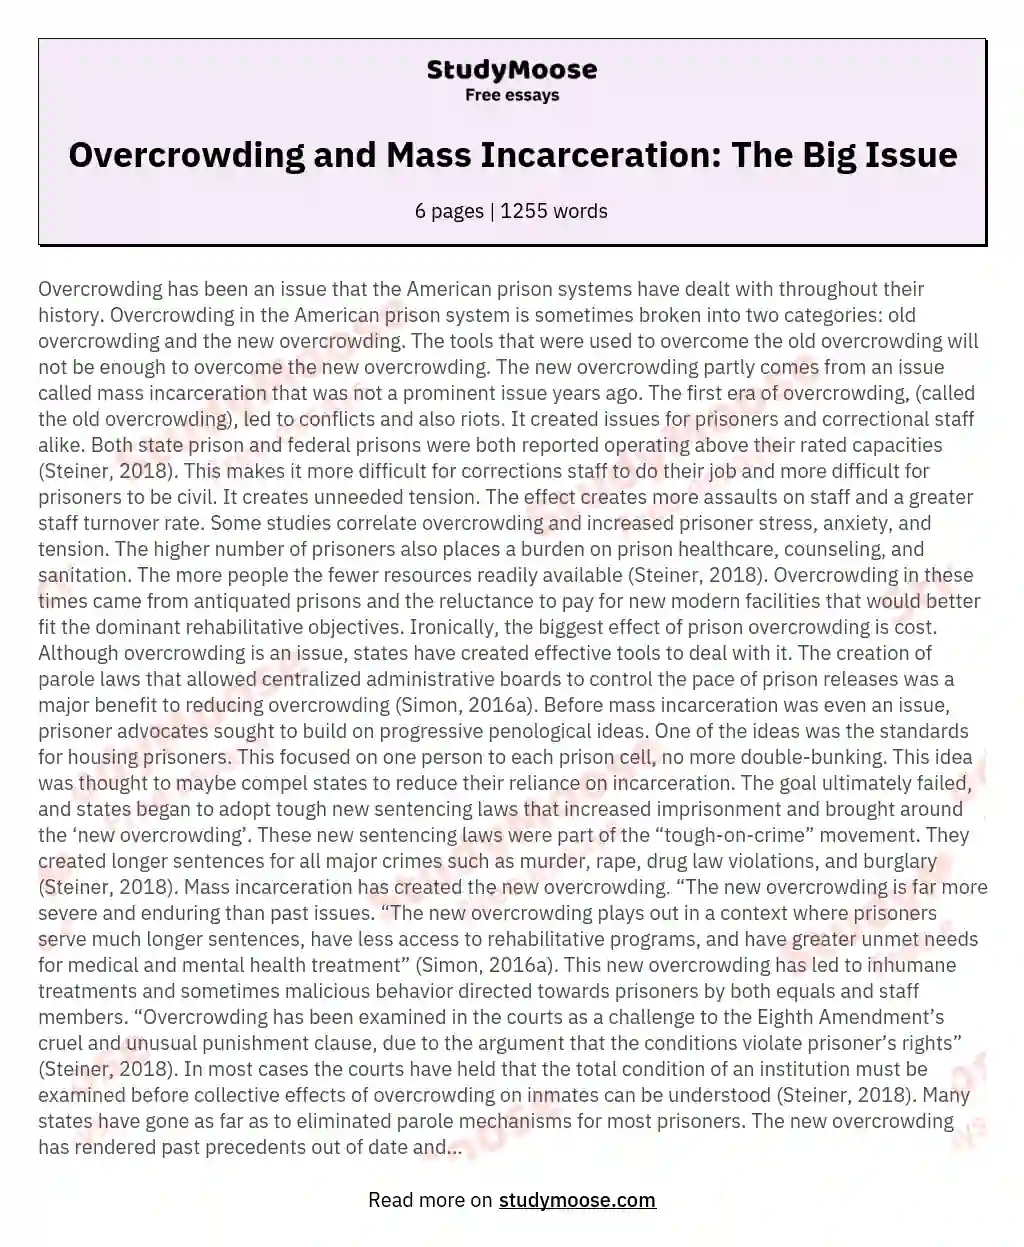 Overcrowding and Mass Incarceration: The Big Issue